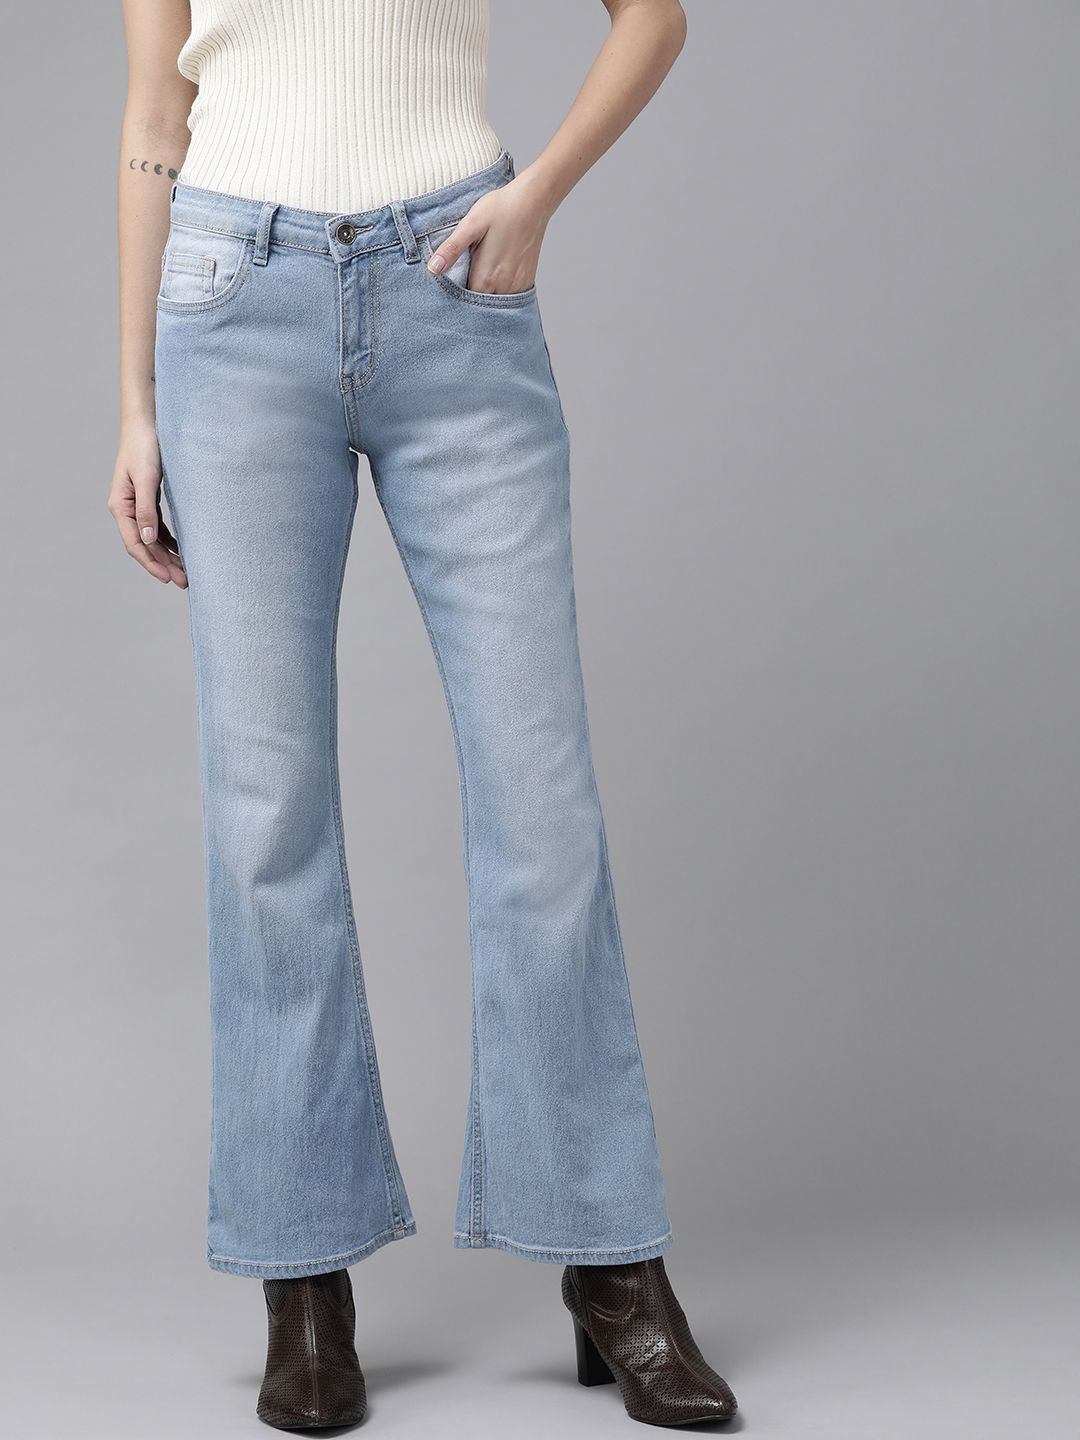 The Roadster Lifestyle Co Women Blue Flared Light Fade Stretchable Jeans Price in India